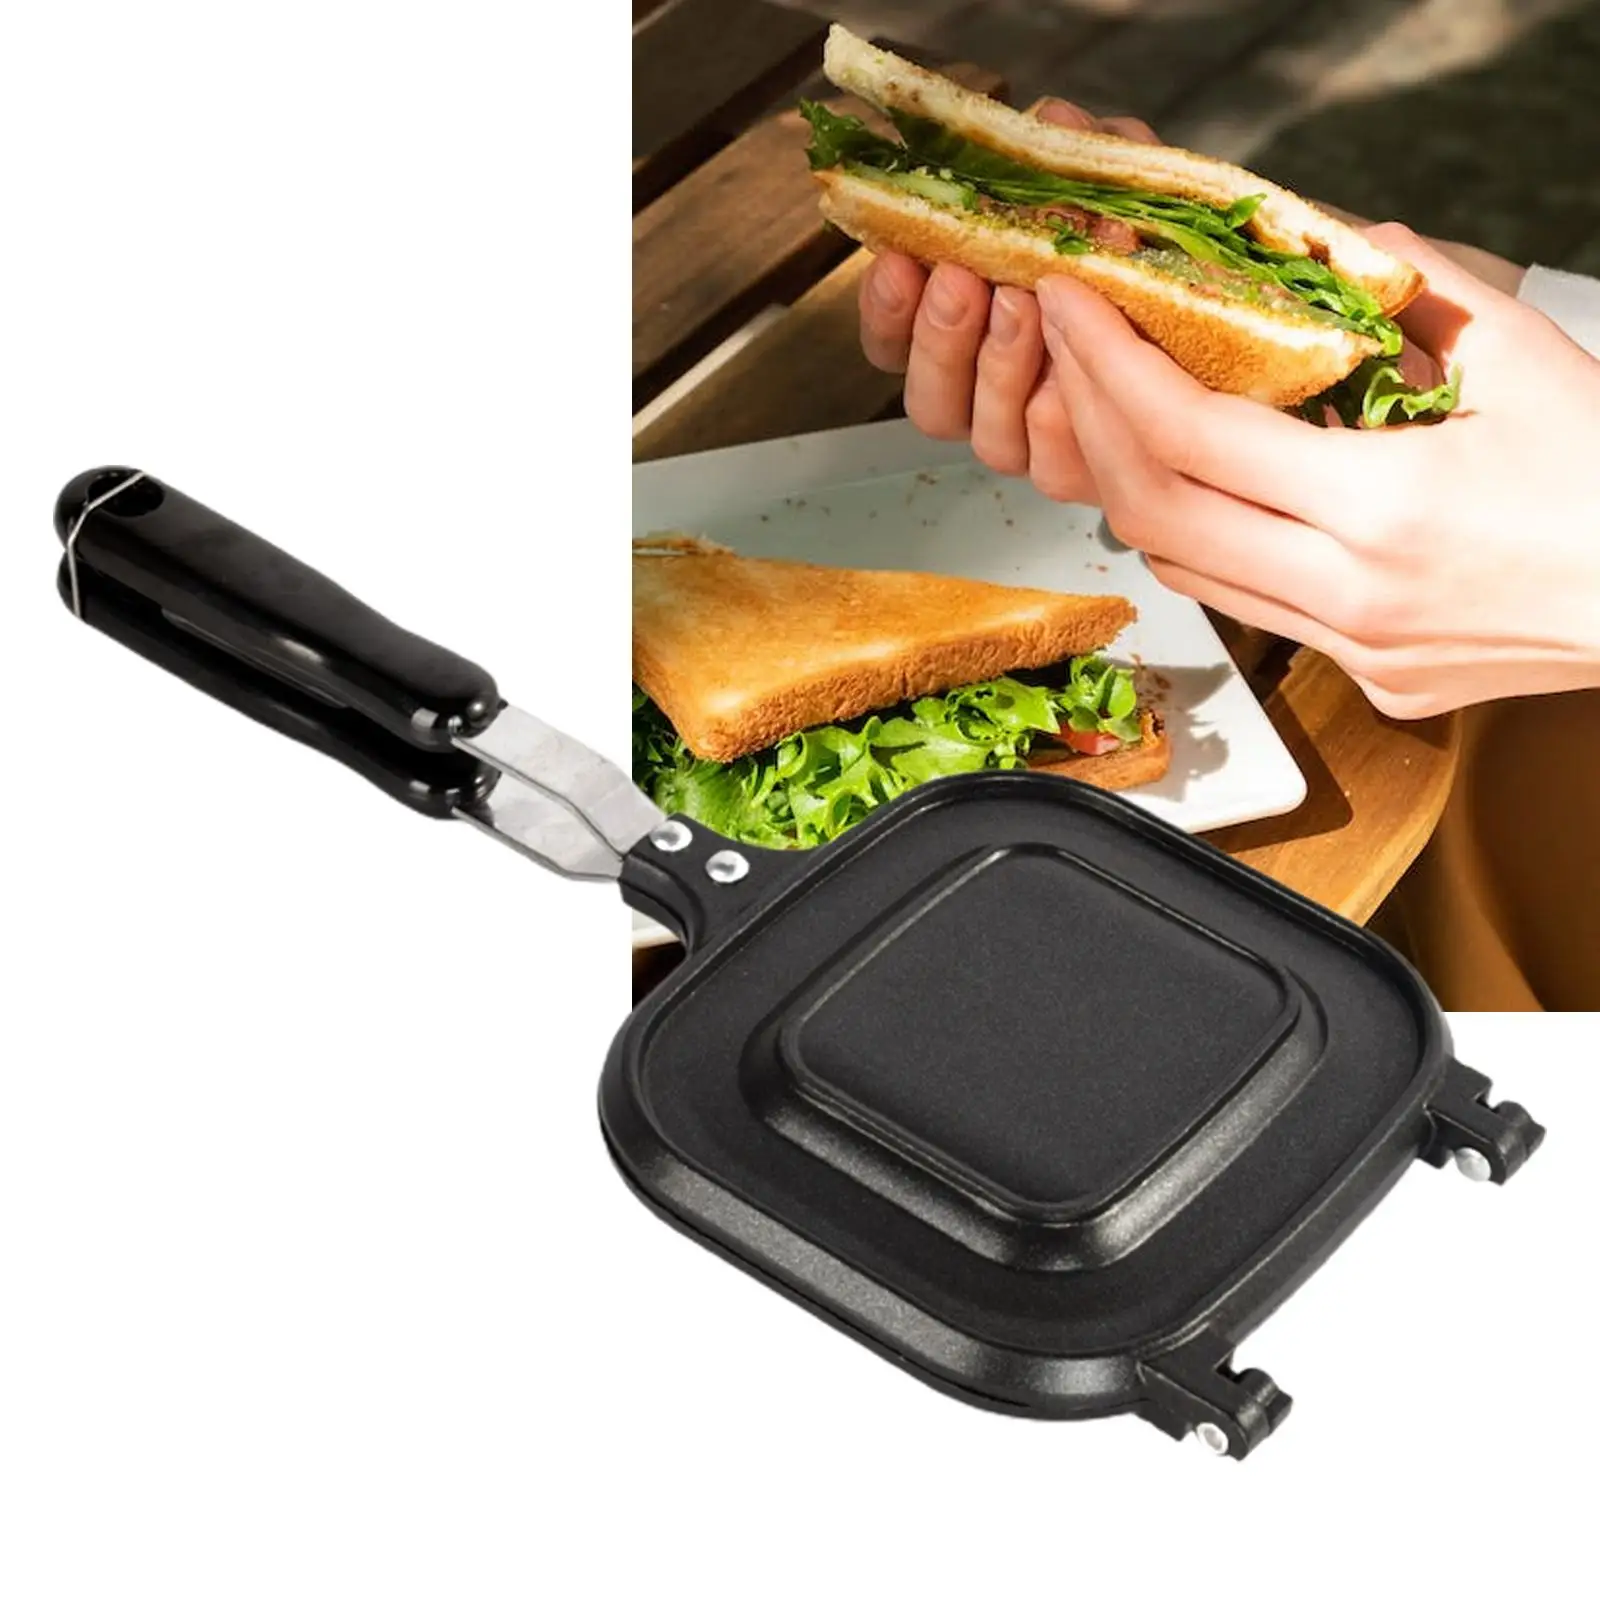 Sandwiches Maker Grill Pan Non Stick Coating Cookware for Stove Top Kitchen